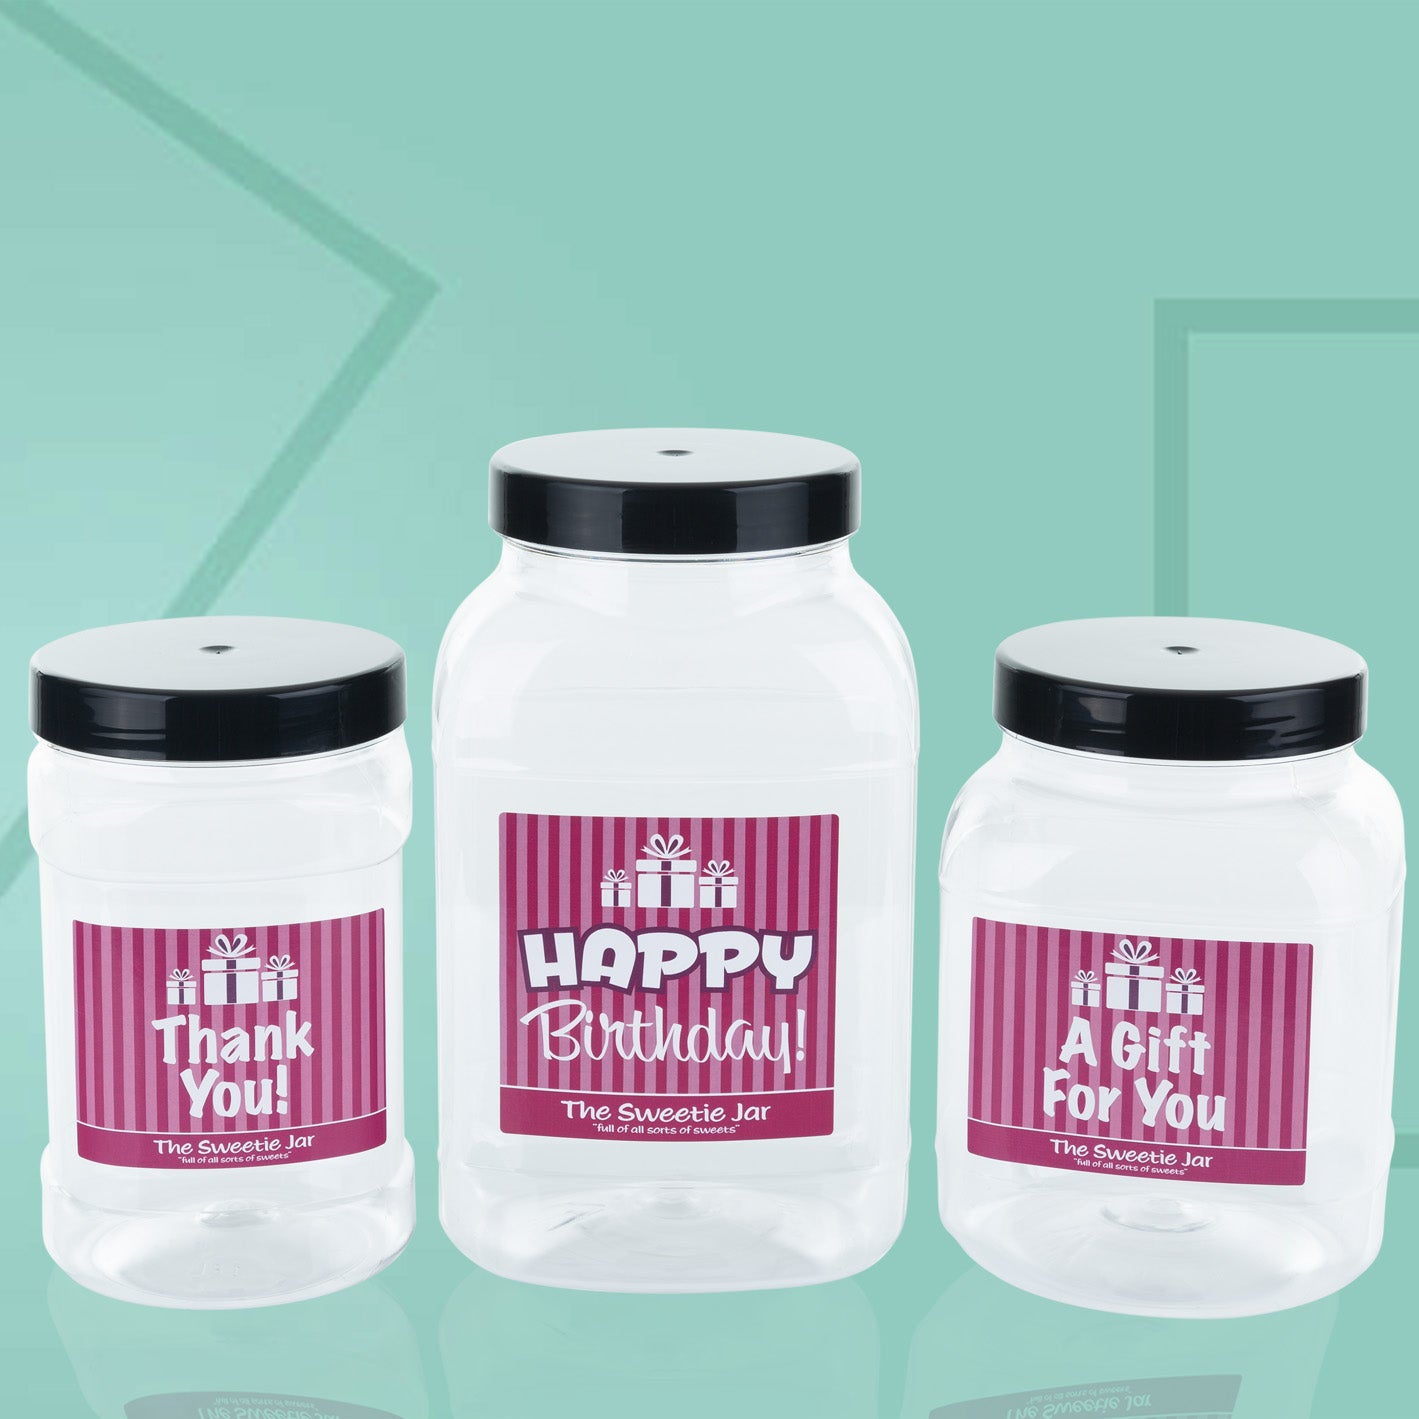 Create Your Own Personalised Sweet Jar - They make great gifts, whatever the occasion.